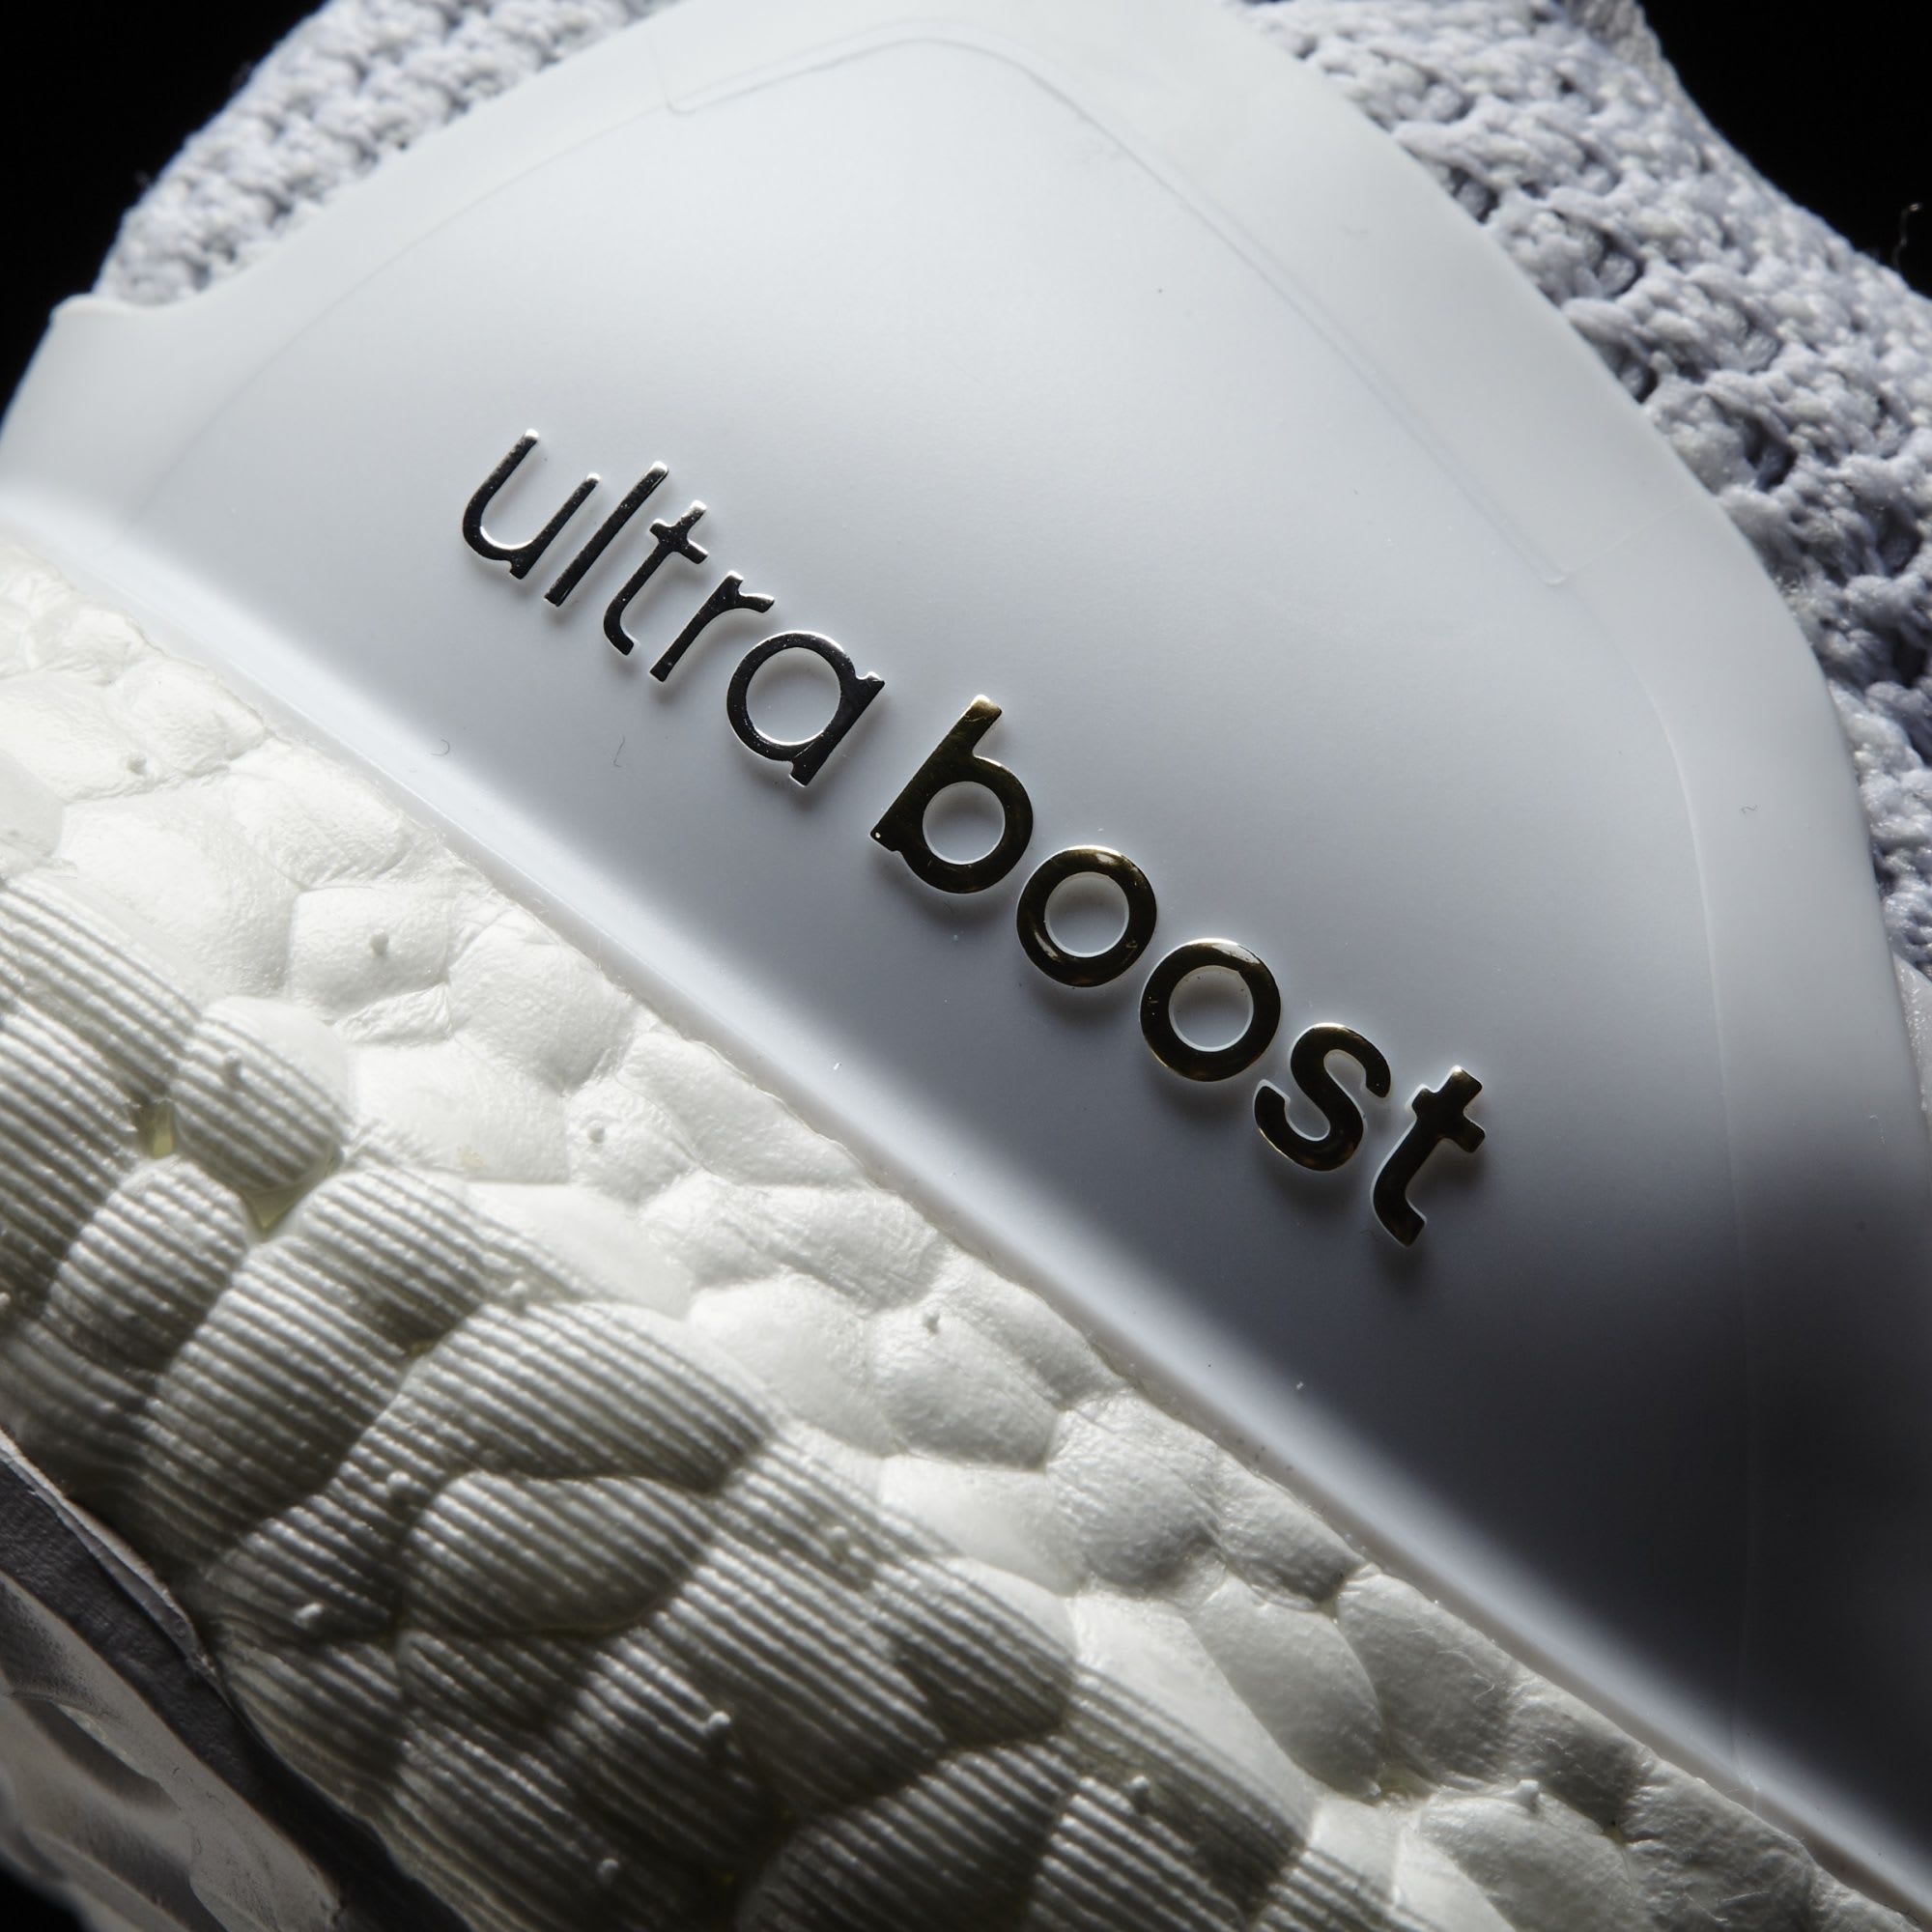 Adidas Ultra Boost 2.0 White Reflective 2018 Release Date BB3928 Counter